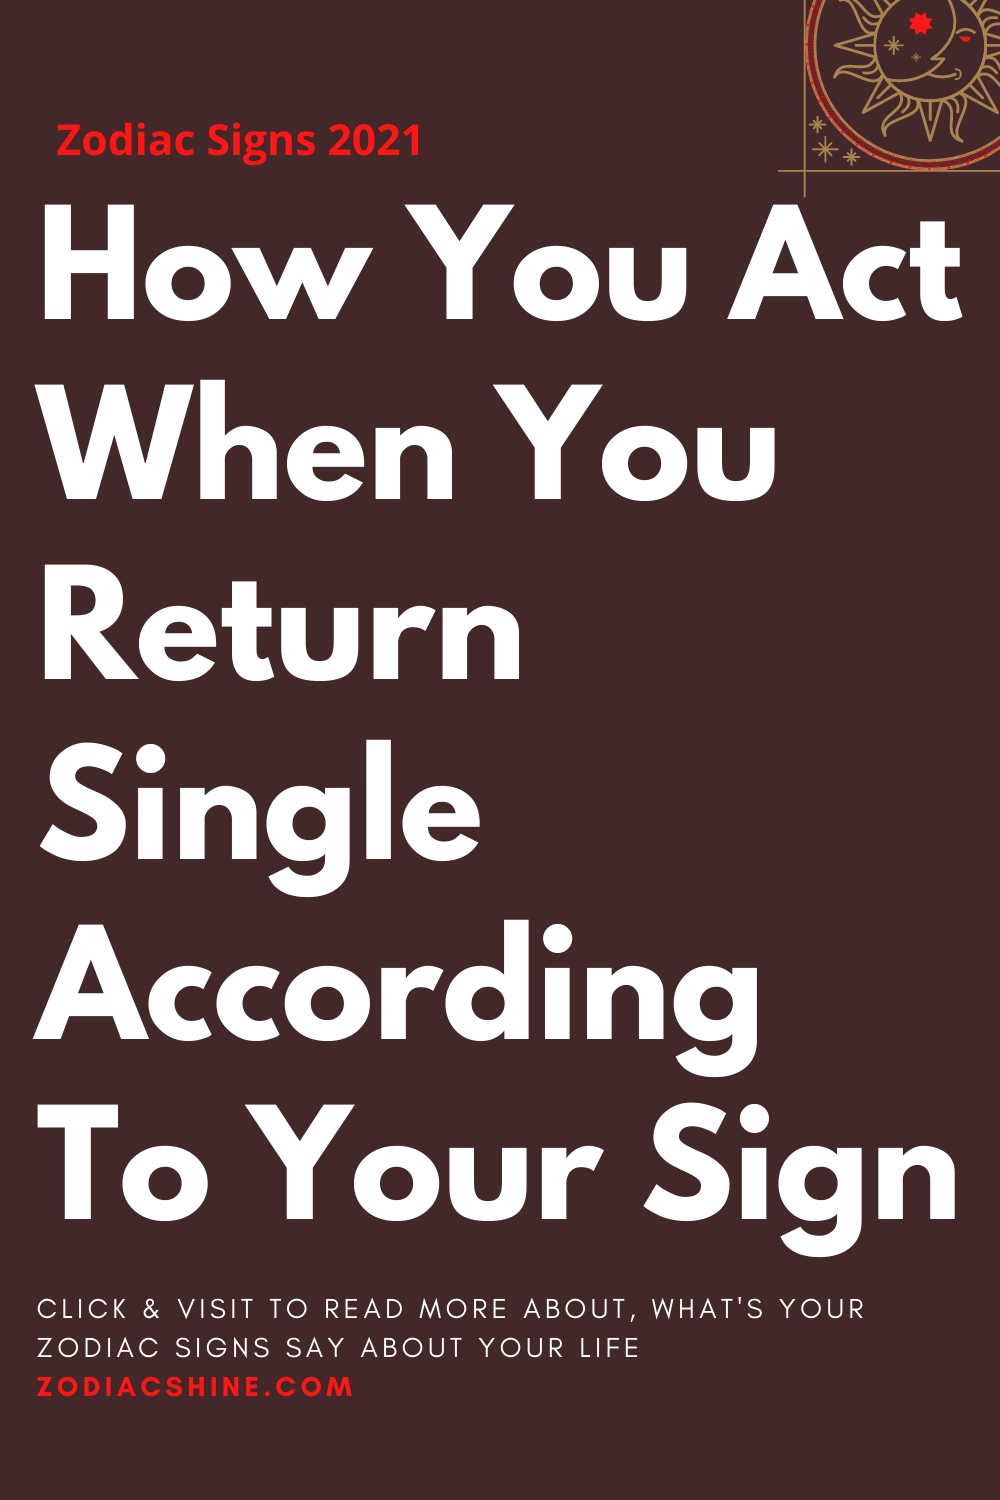 How You Act When You Return Single According To Your Sign